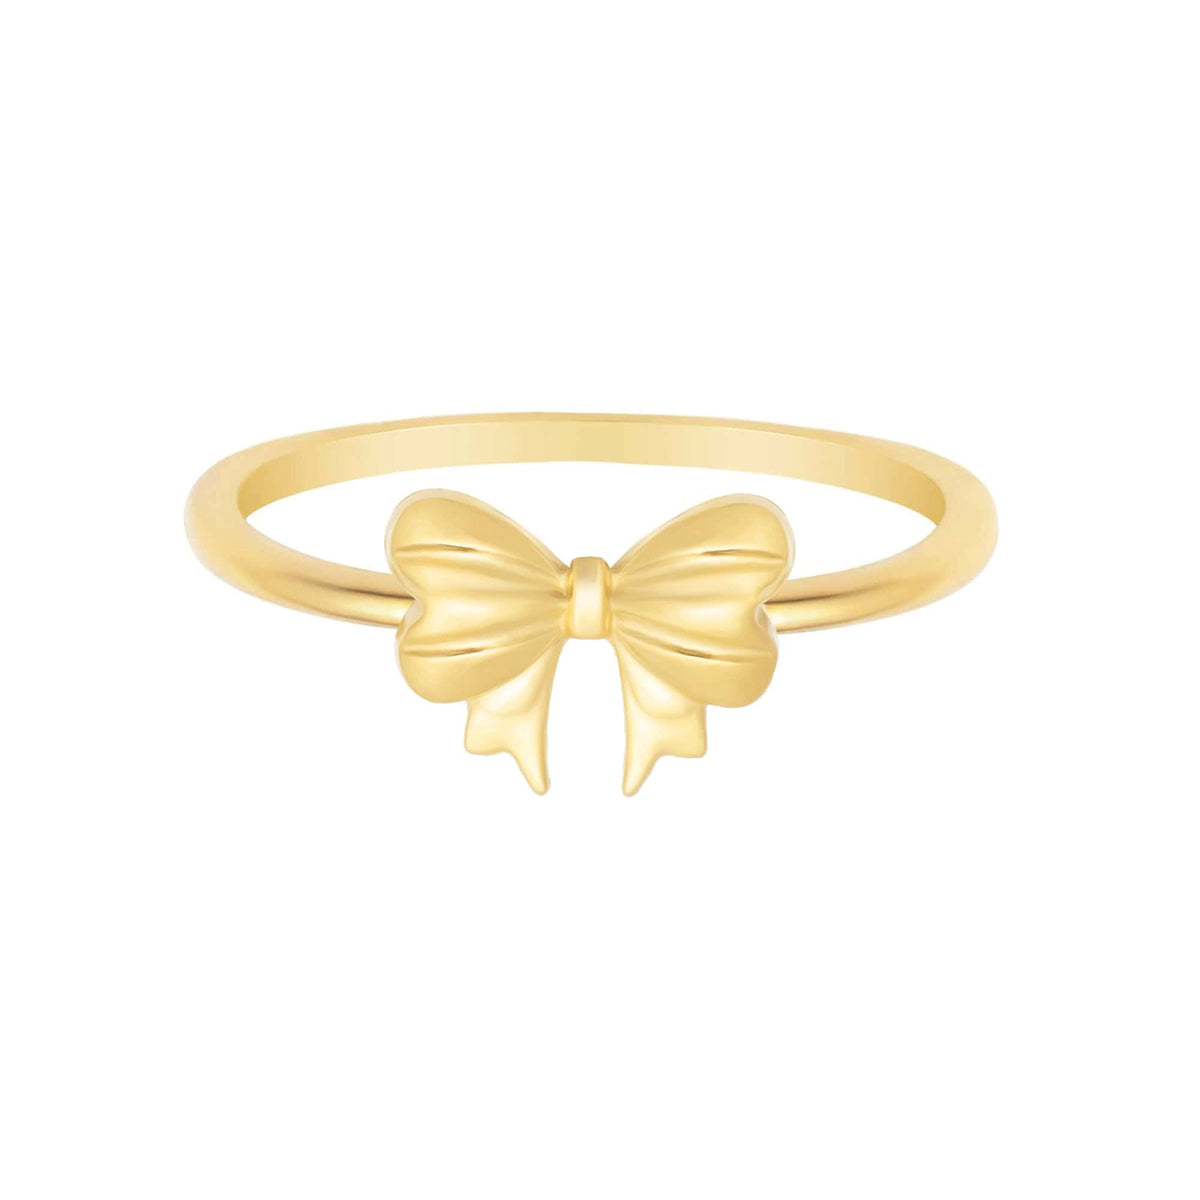 BohoMoon Stainless Steel Bow Ring Gold / US 6 / UK L / EUR 51 (small)